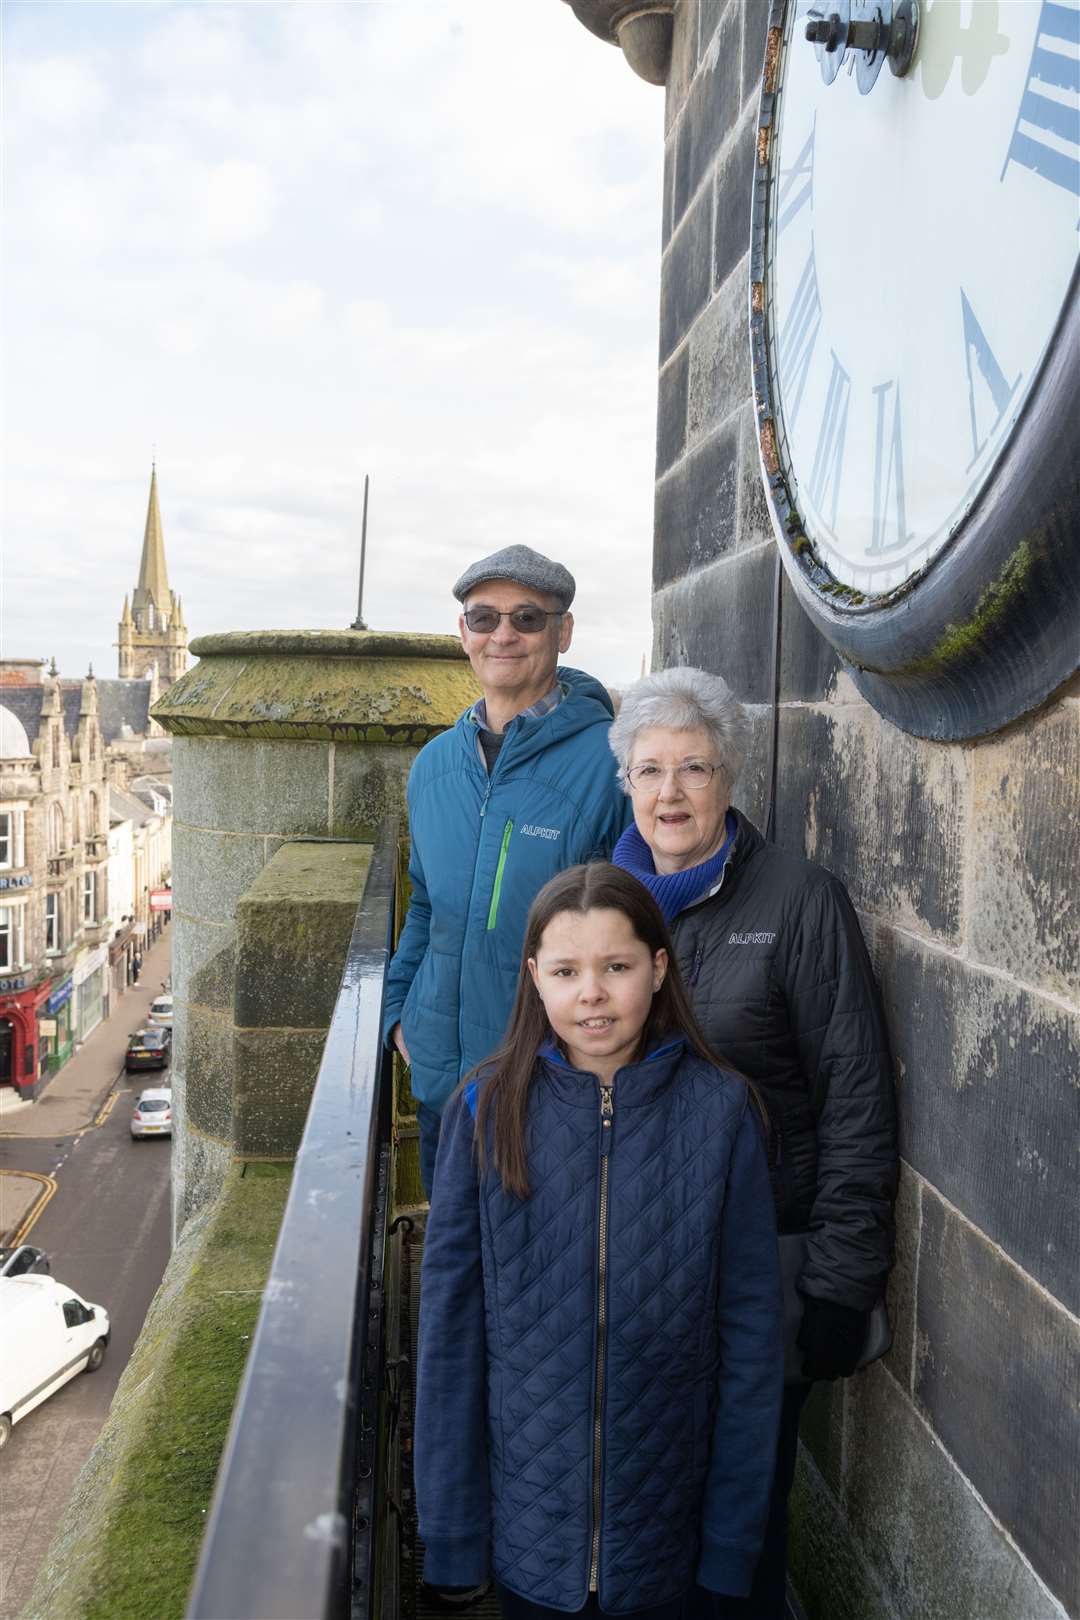 Volunteers Peter Haworth and Susie Haworth showing Laura Hislop the views from the clock tower. Picture: Beth Taylor